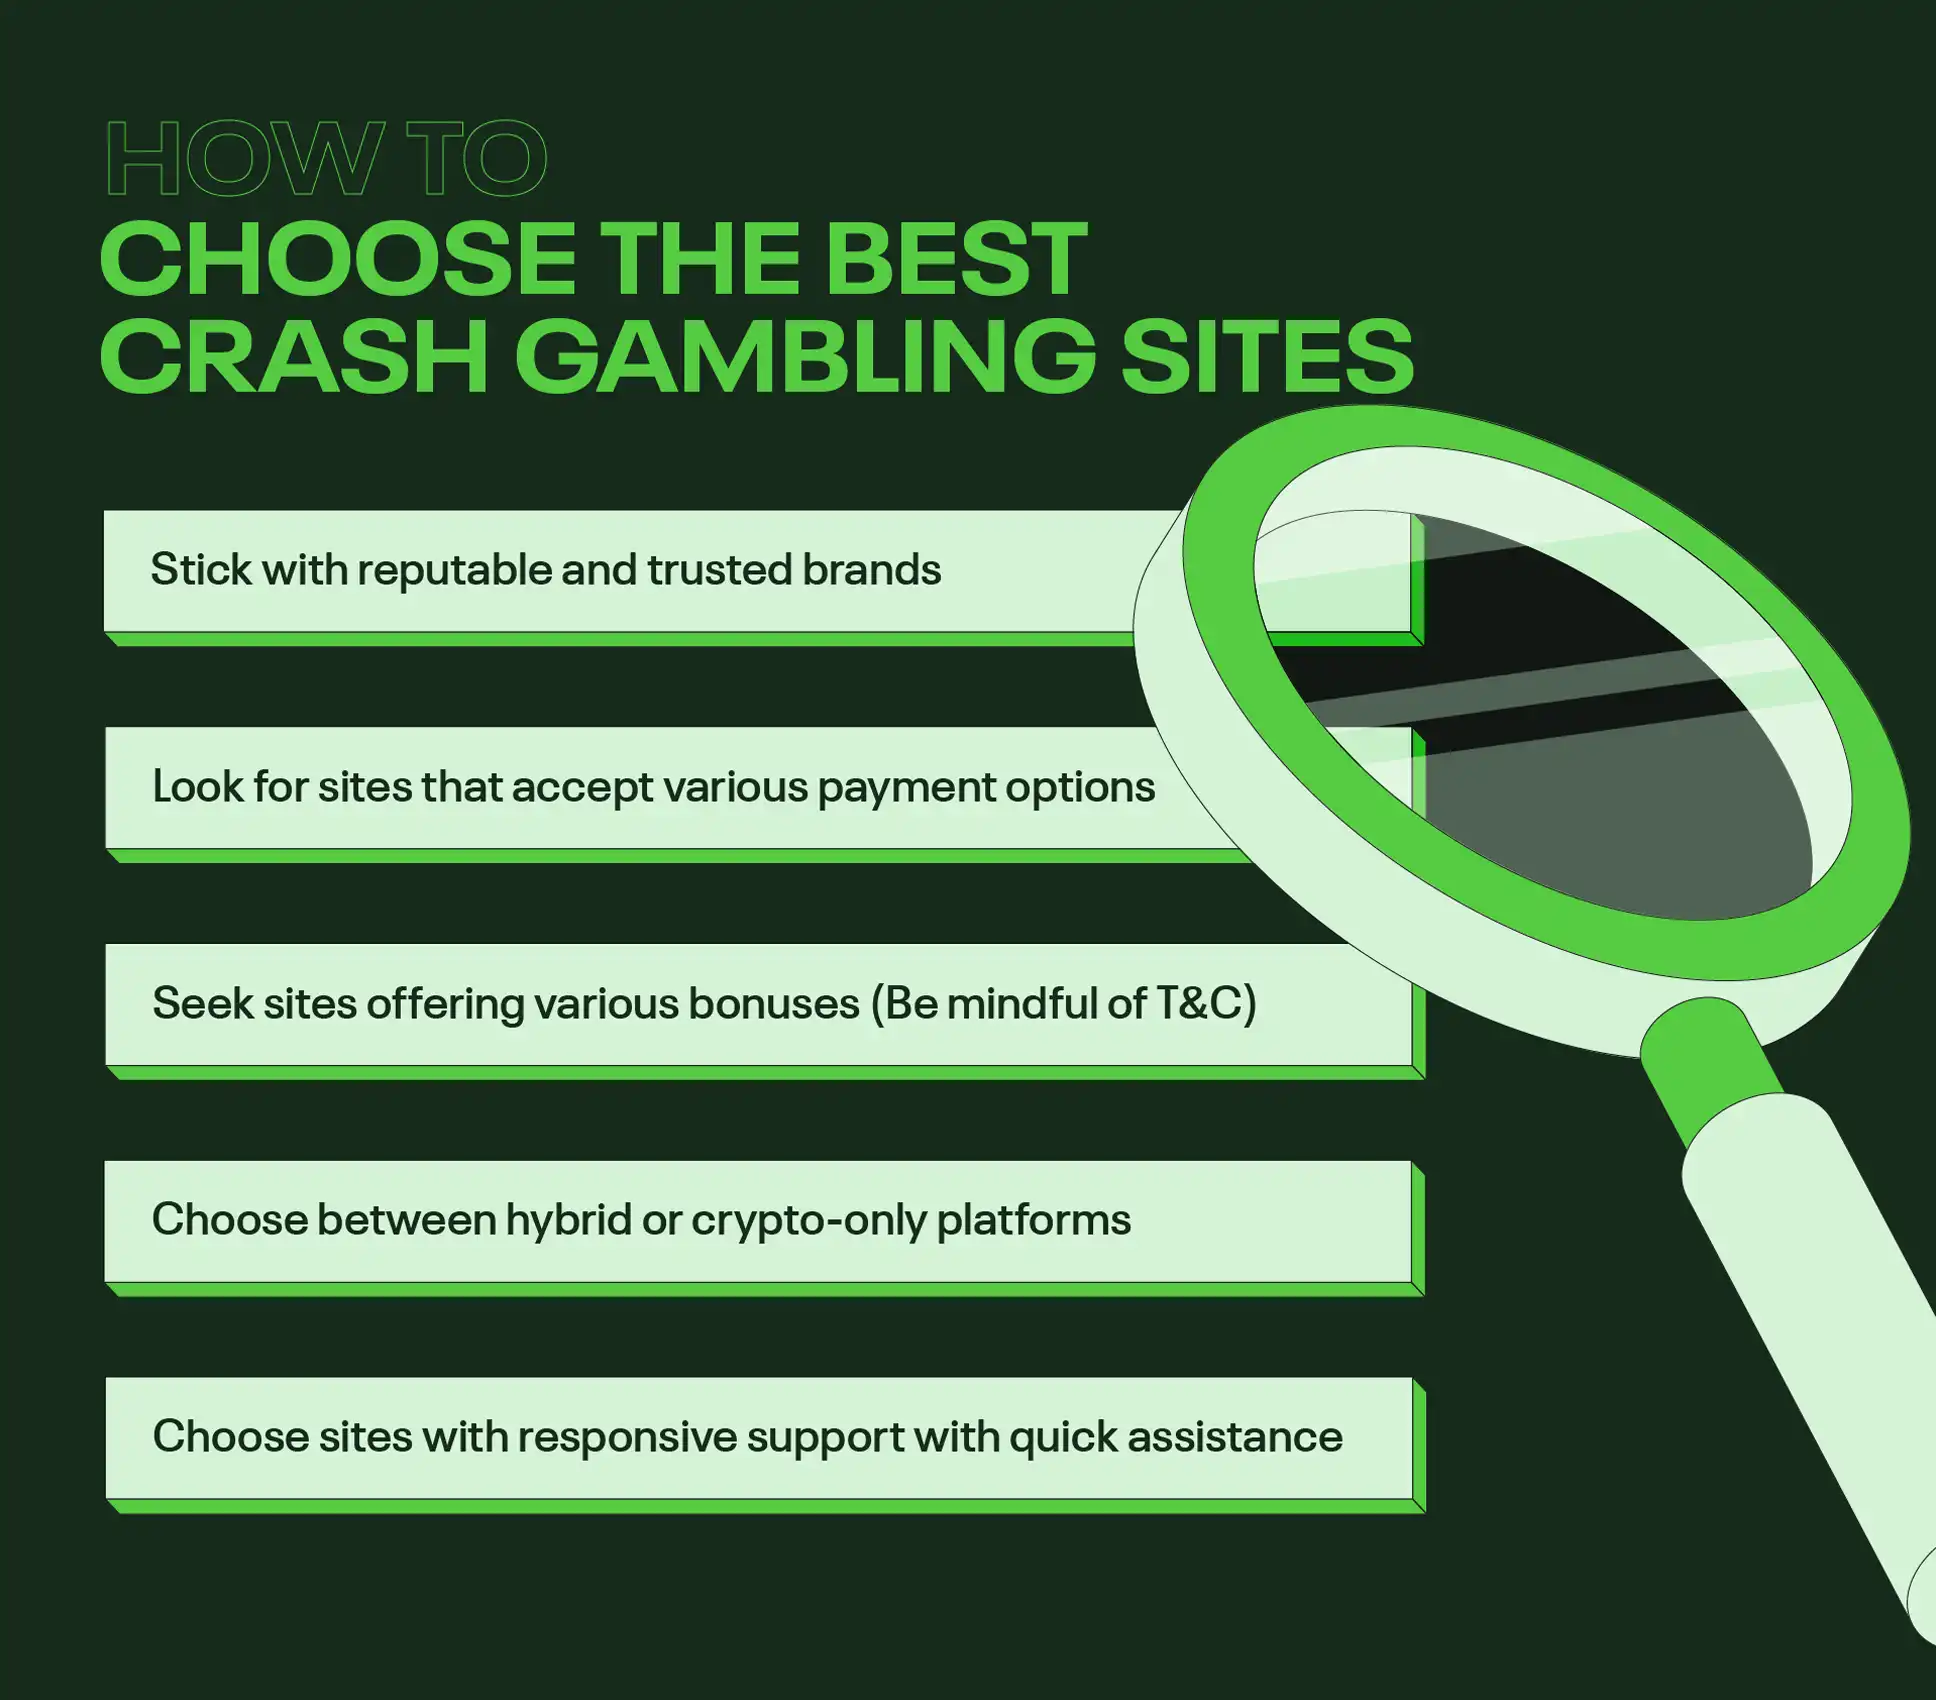 How to choose the best crash gambling sites